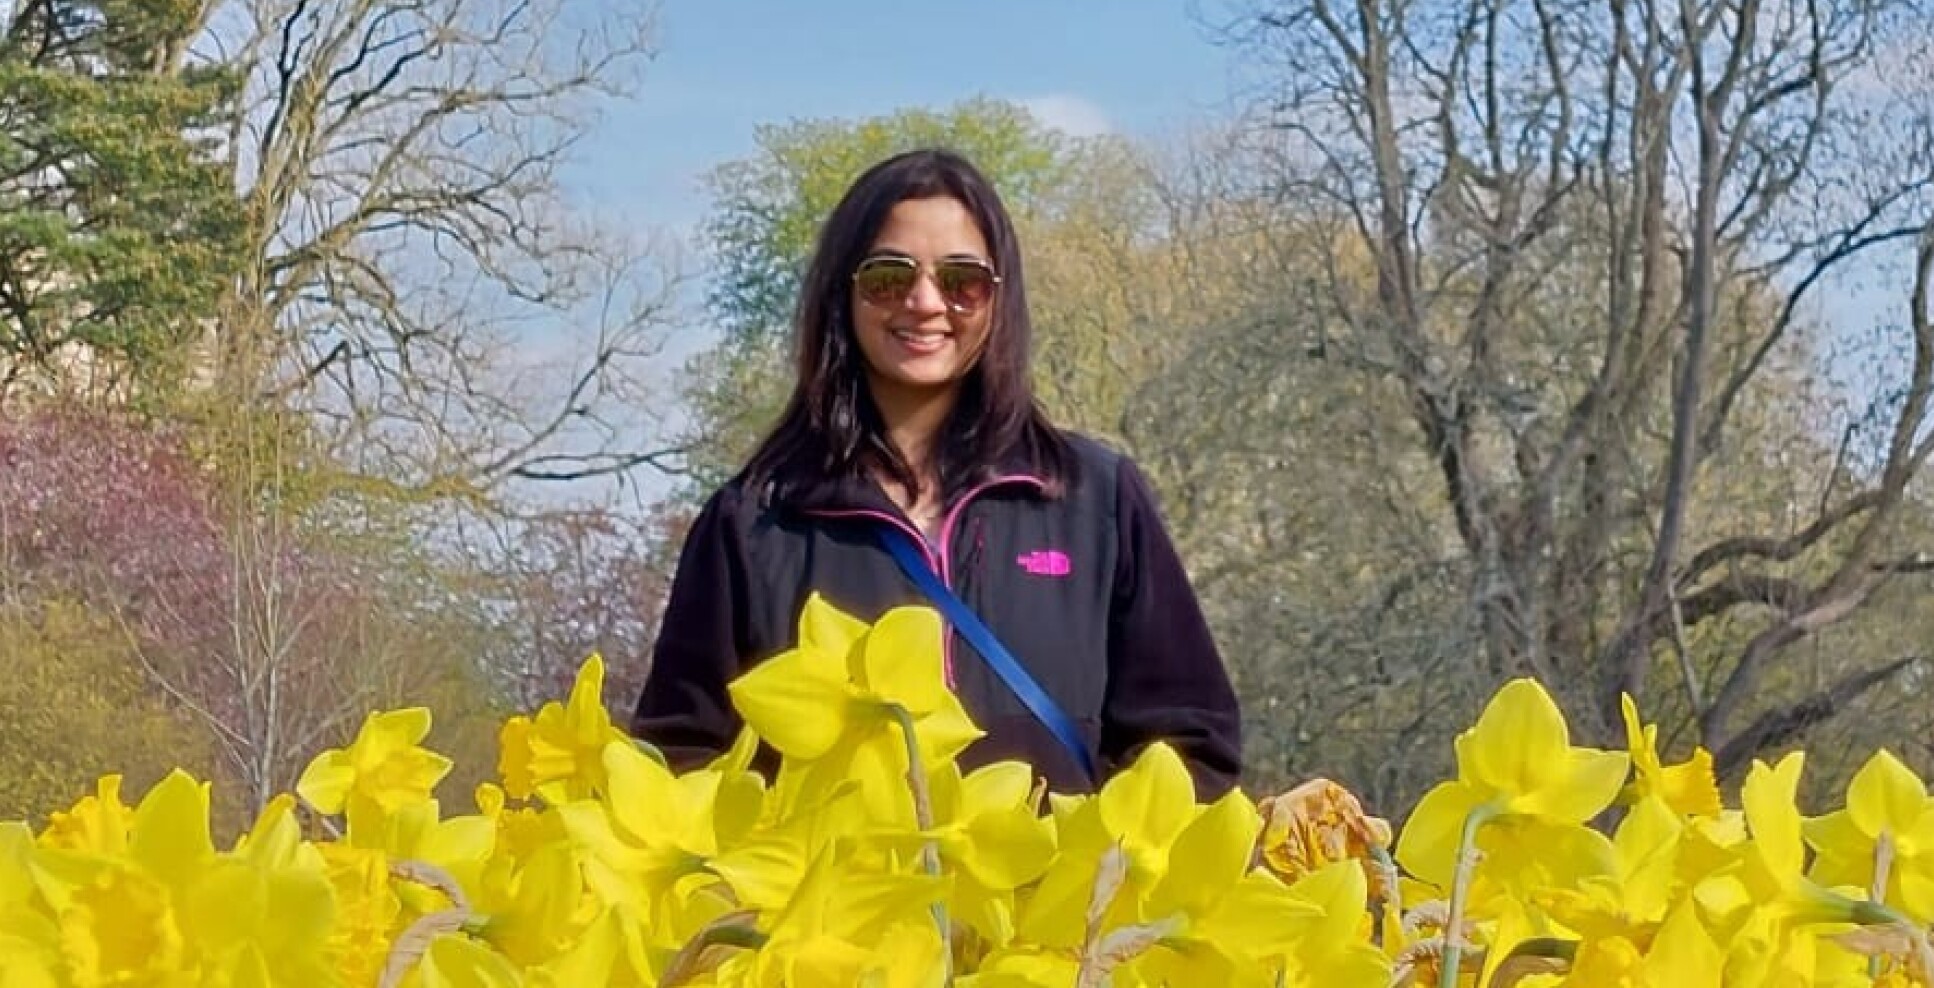 Dr Reshma Rao, a woman with brown hair, standing in a field of daffodils with trees and blue skies in the background i